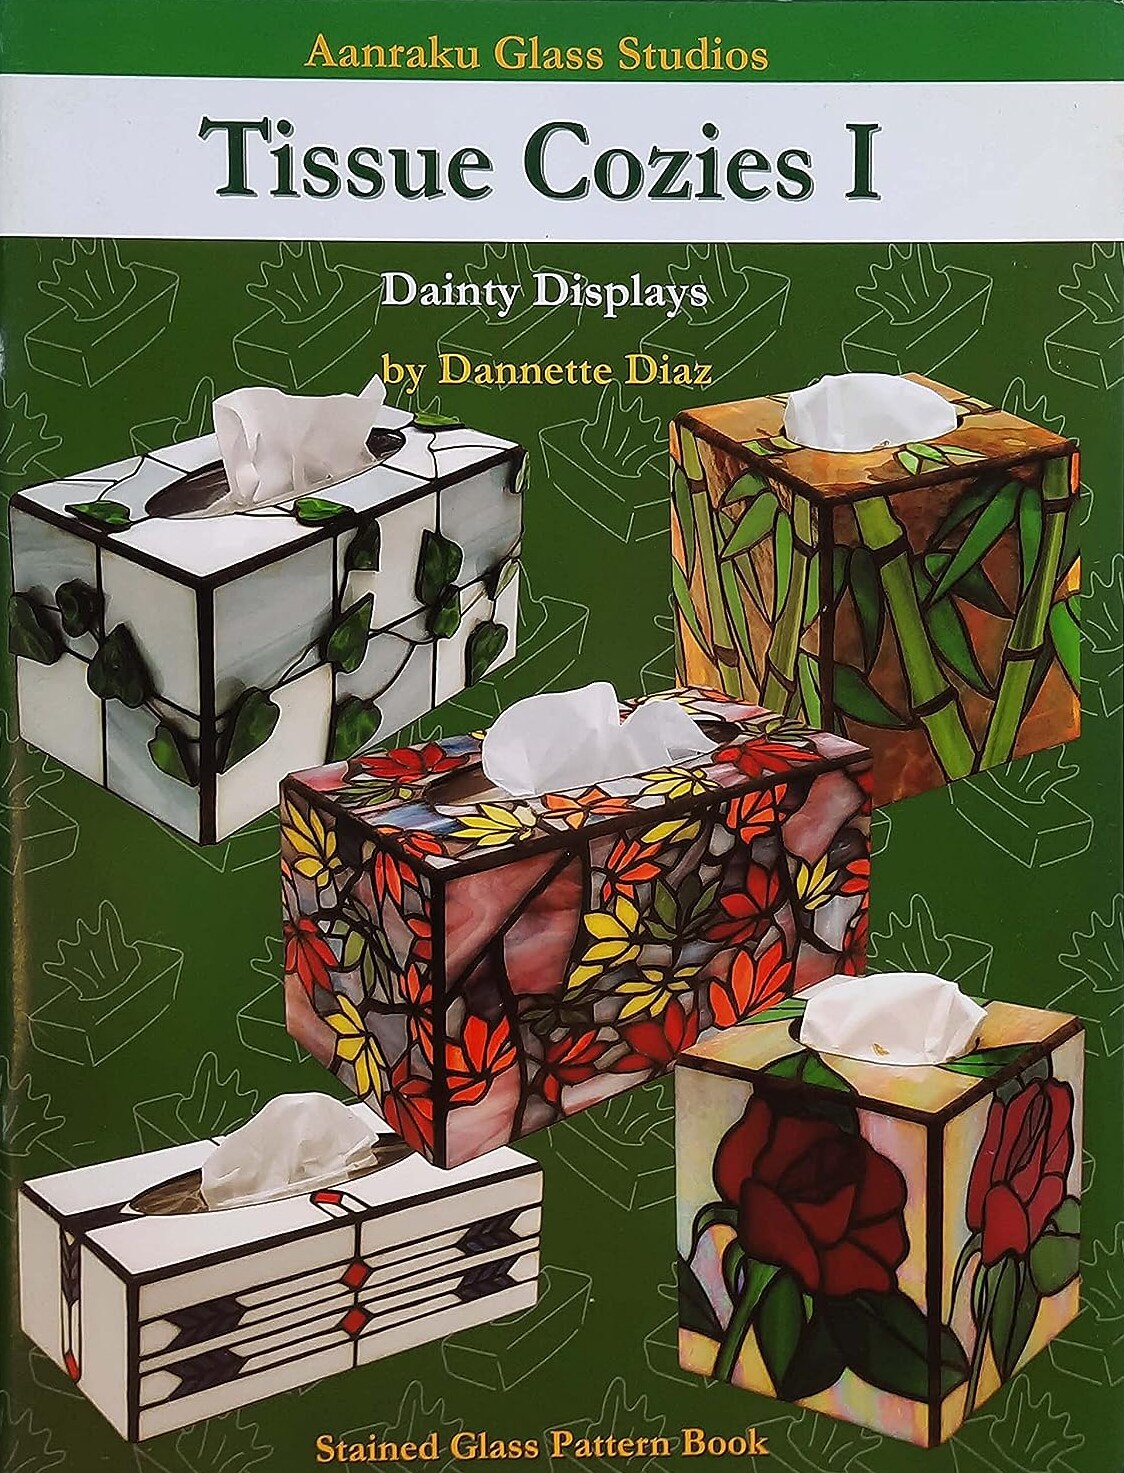 Stained Glass Pattern Book: Tissue Cozies I